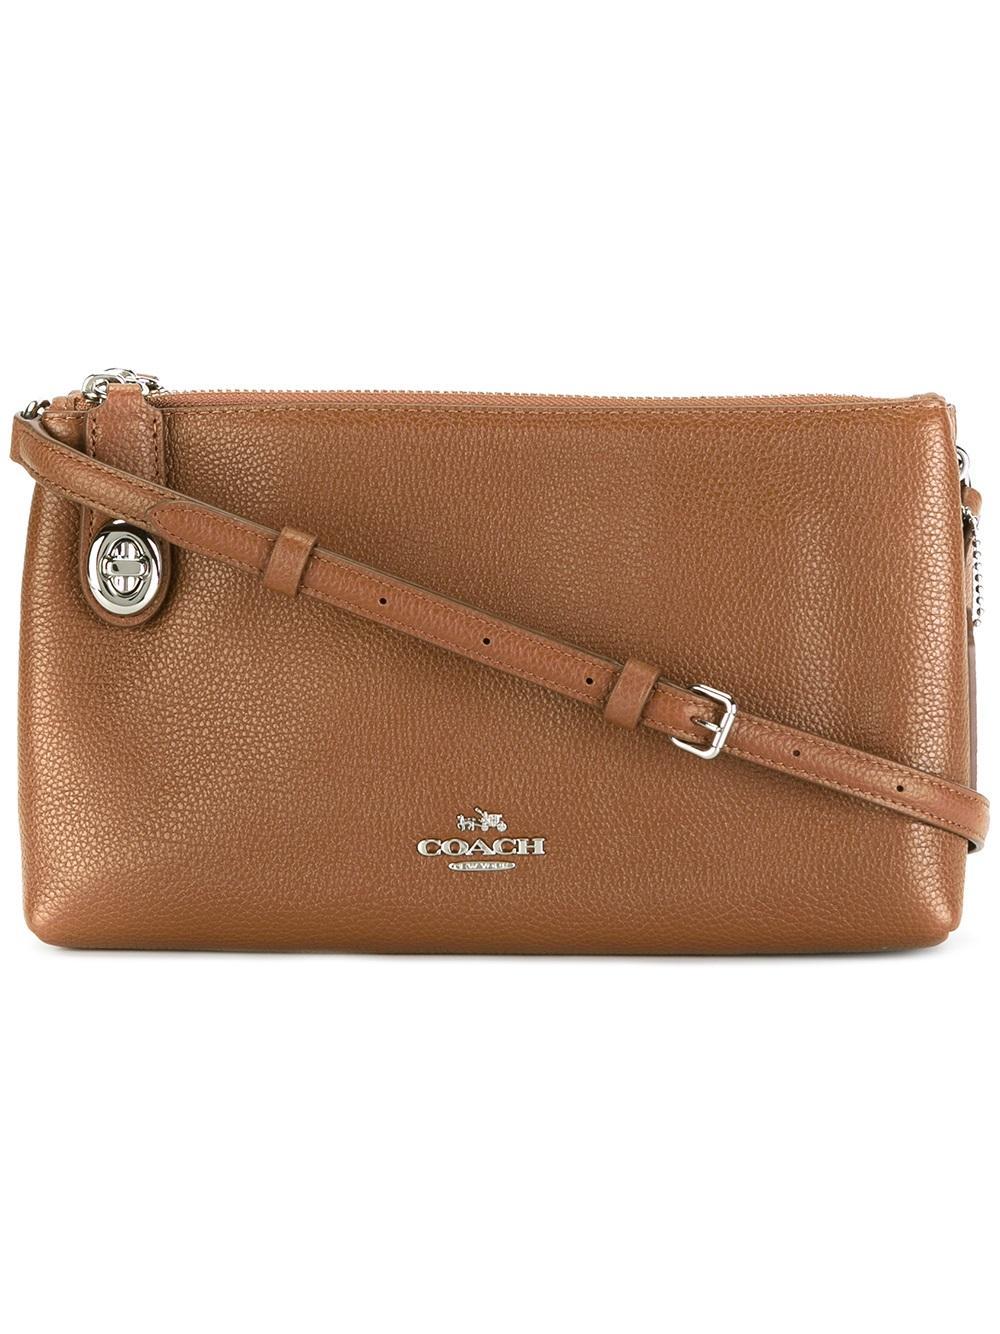 COACH Leather Crossbody Bag in Brown - Lyst